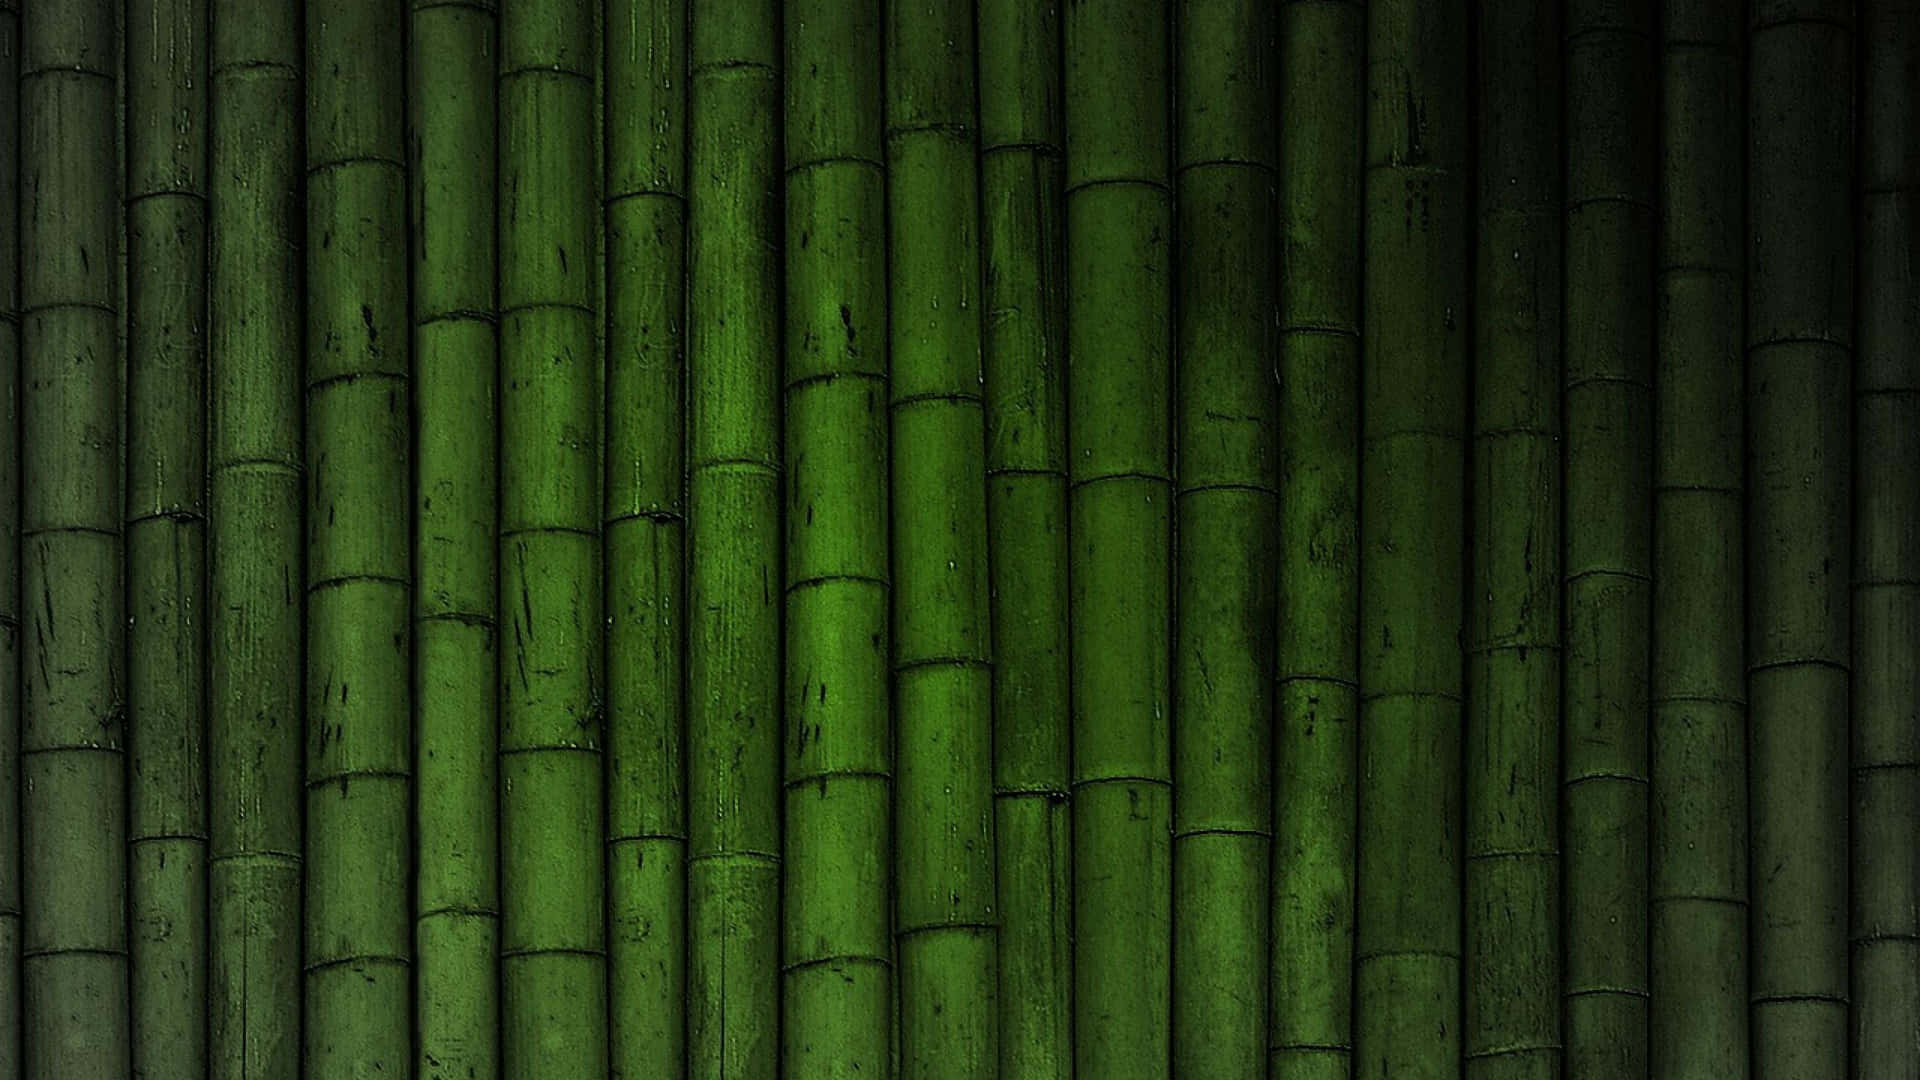 Bamboo Forest in a Lush Environment